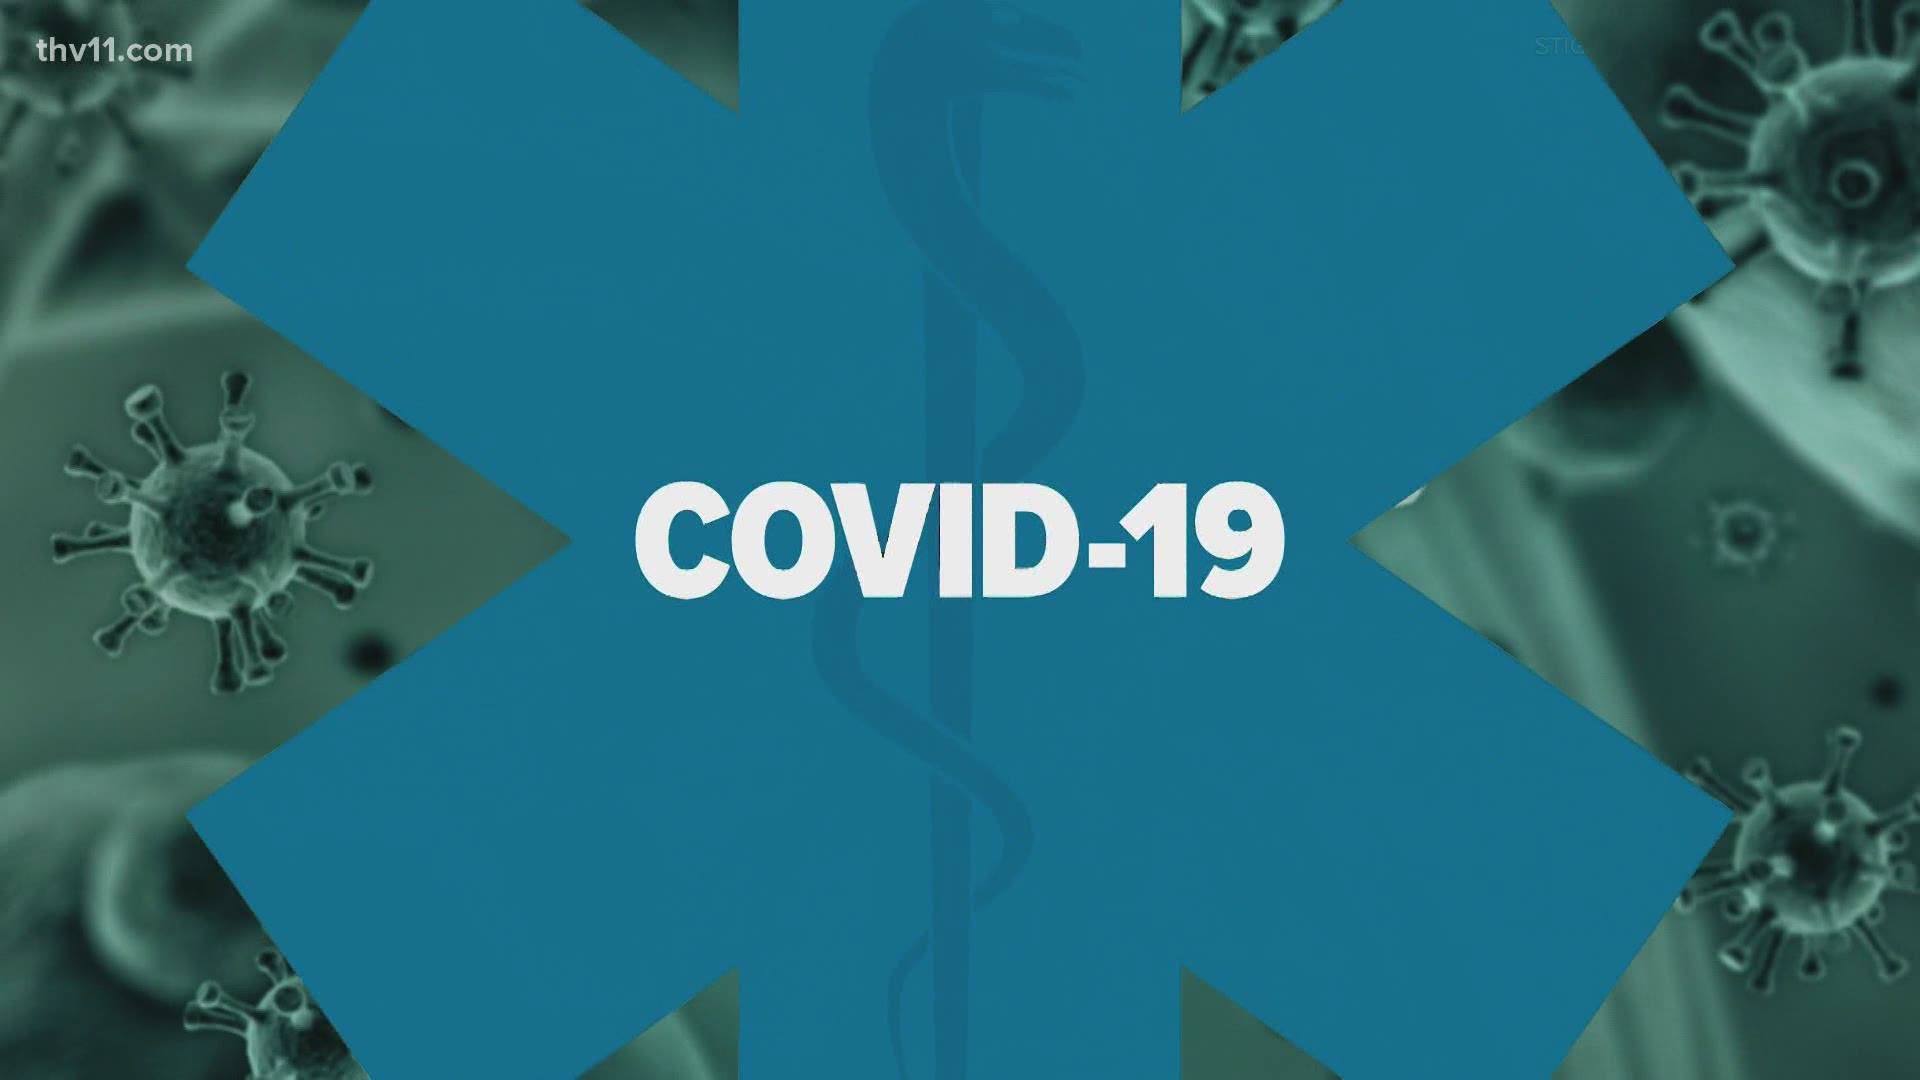 Marlisa Goldsmith reports on the COVID-19 updates throughout the state.